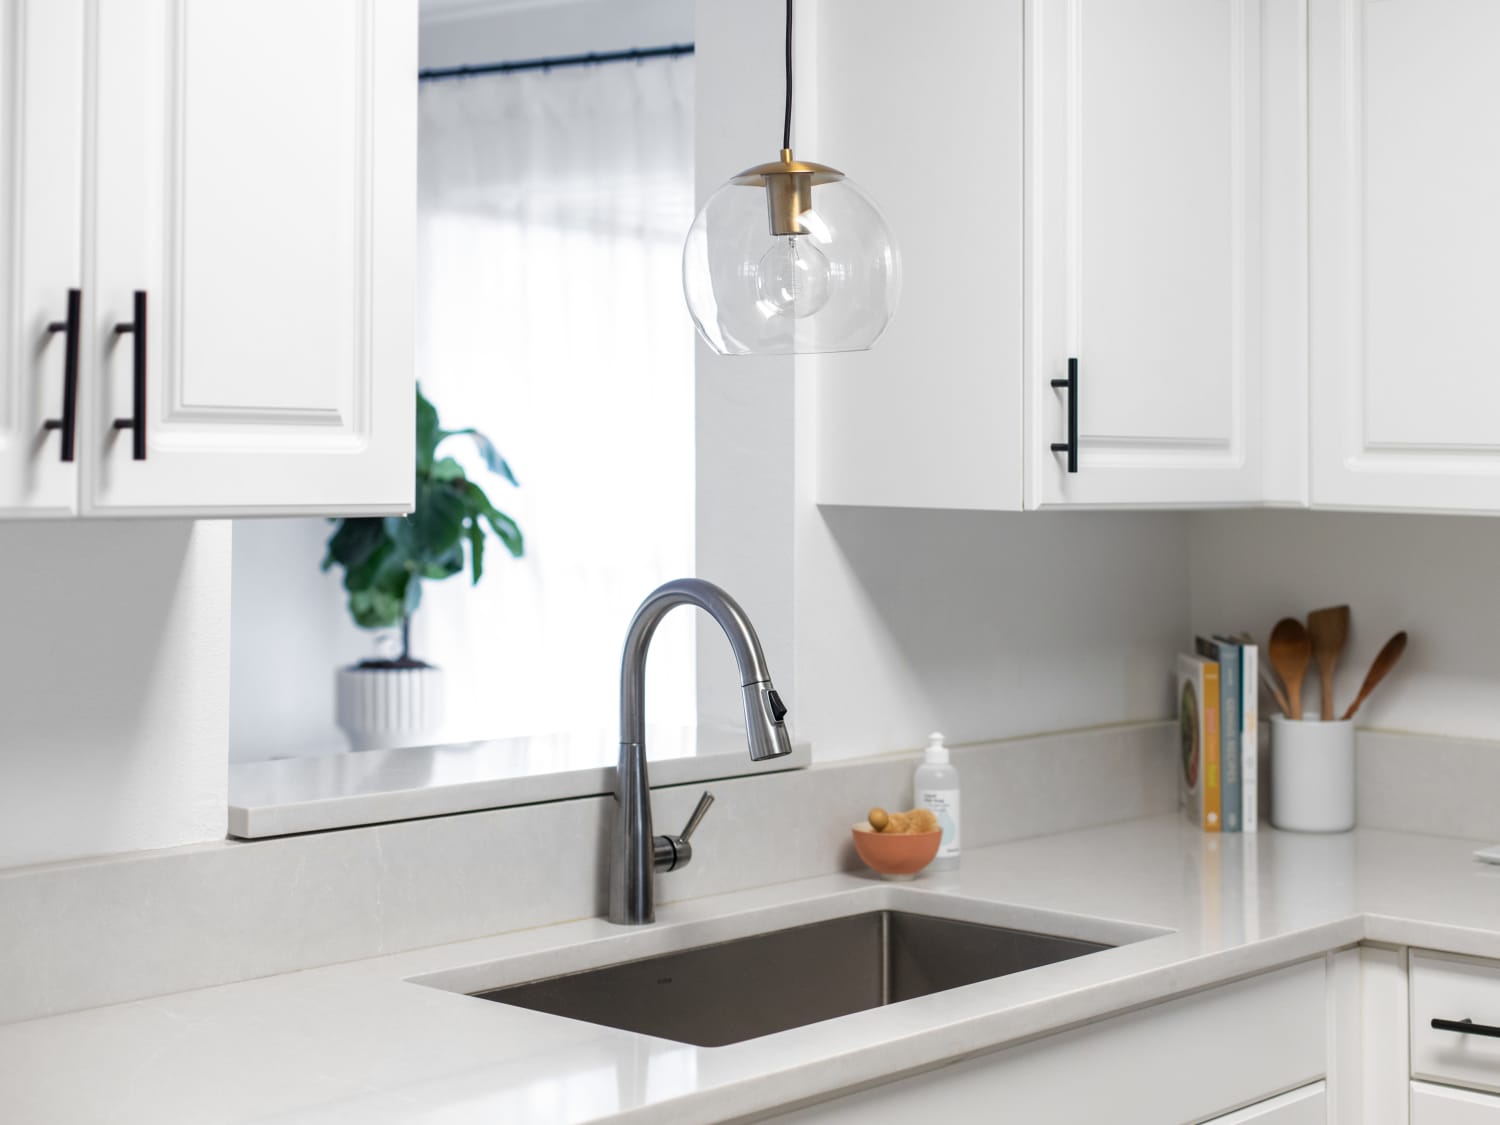 Single Pendant Lighting Over Kitchen Sink – Things In The Kitchen